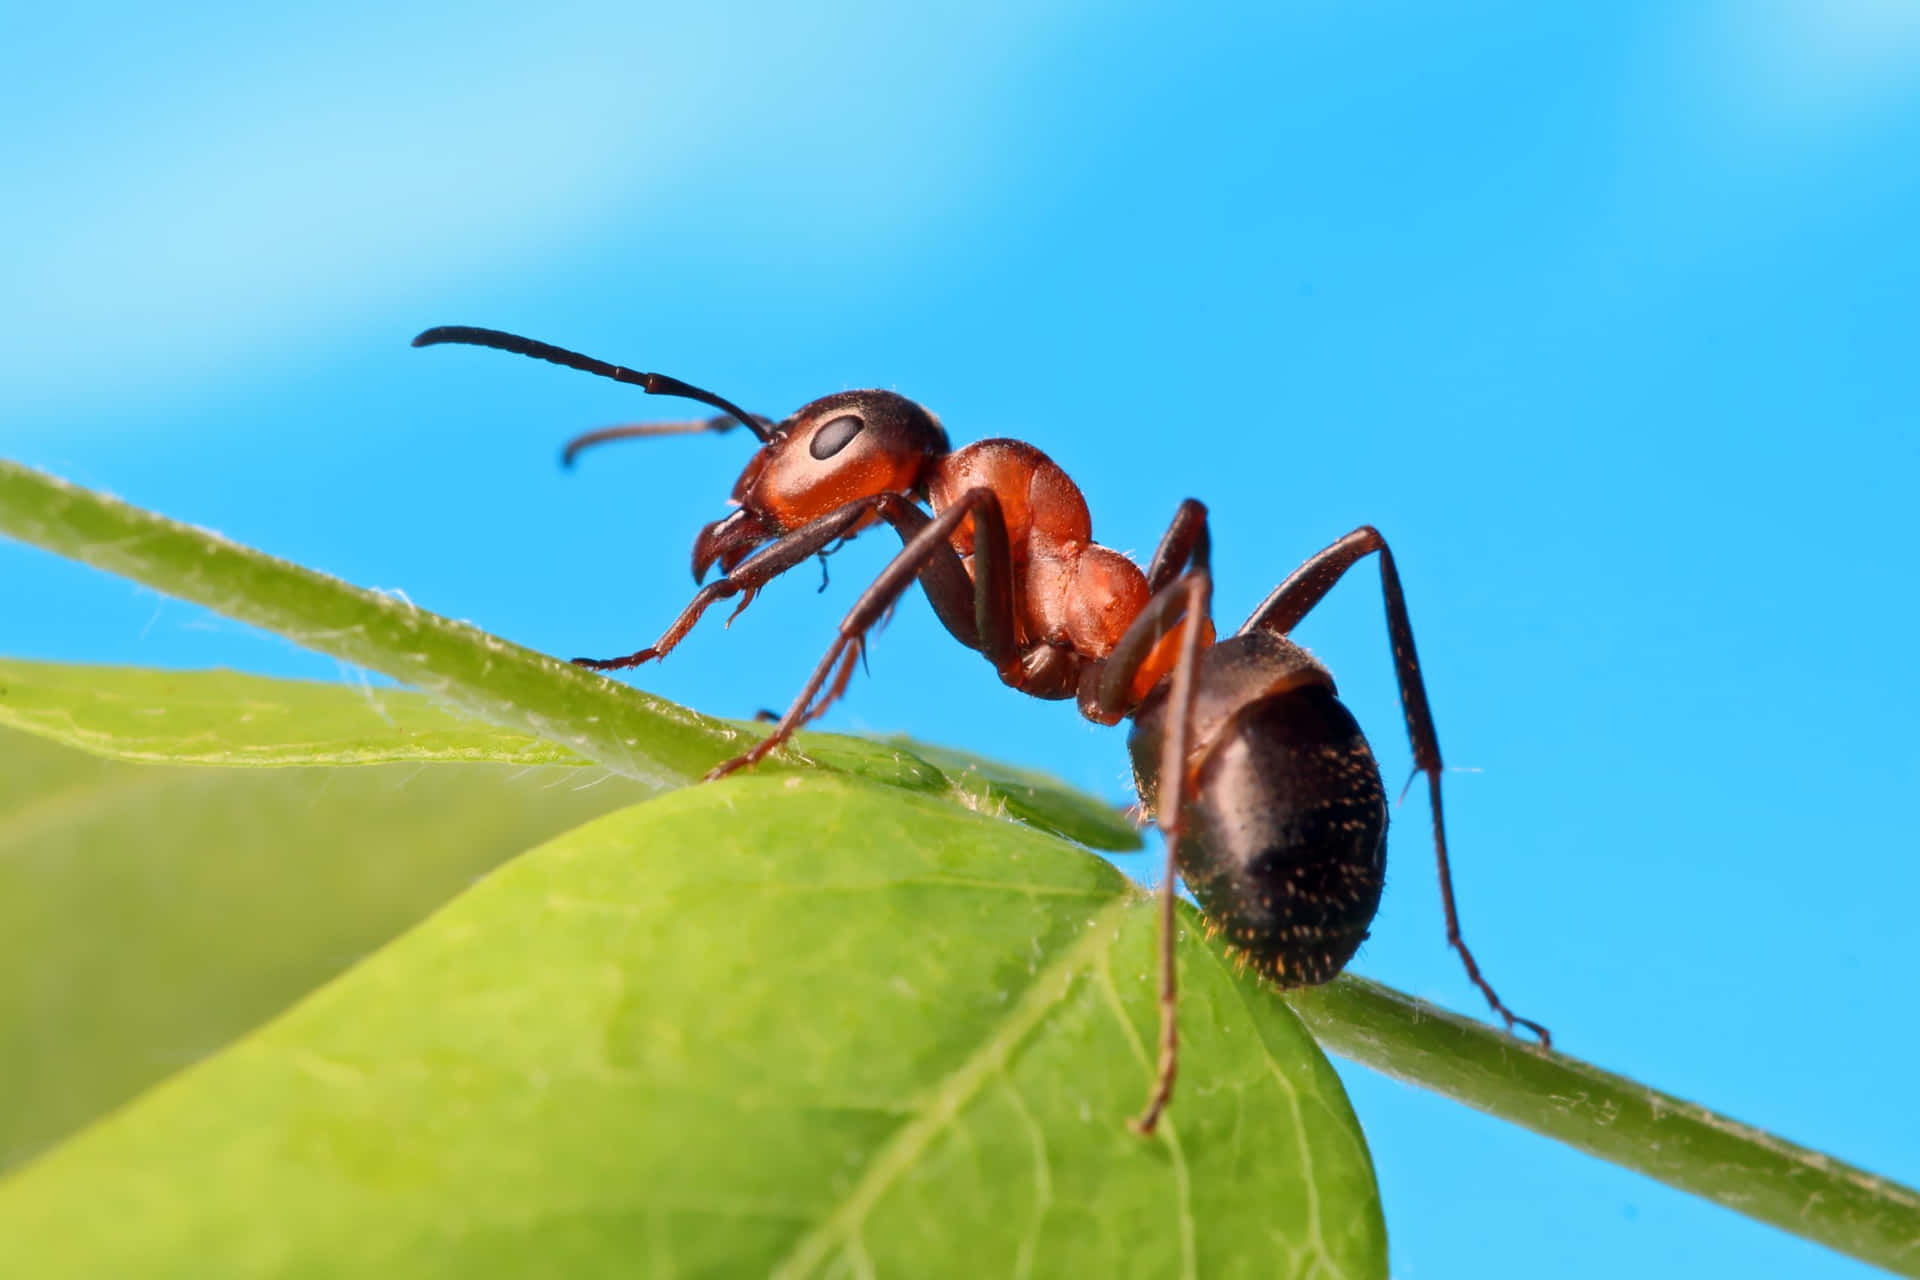 A worker ant works hard to carry food back home.